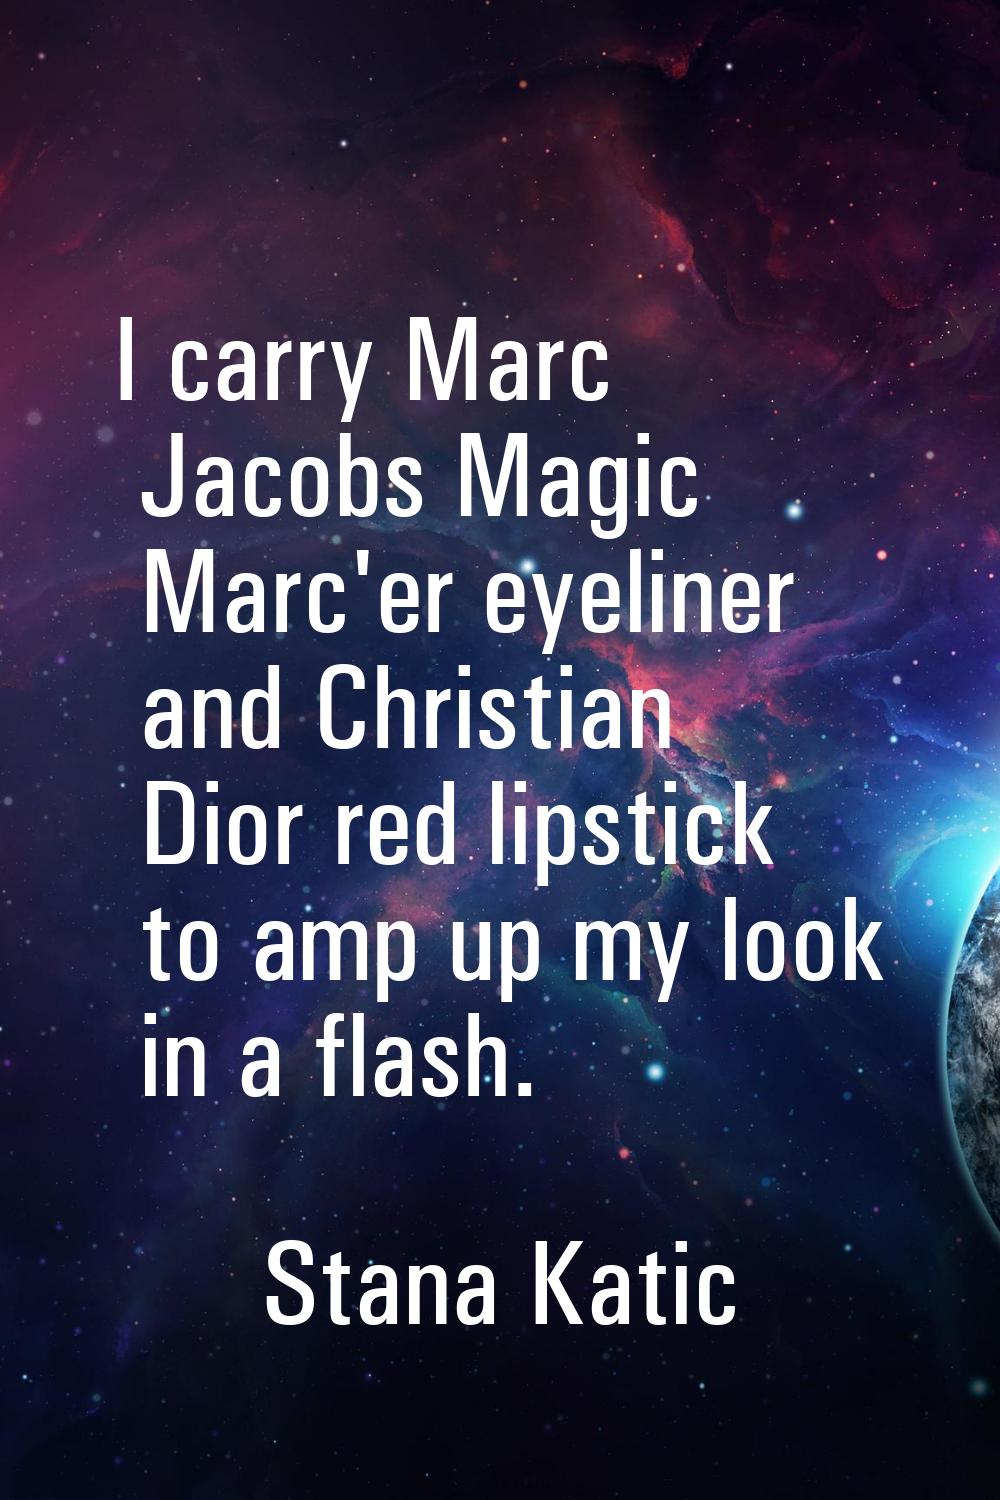 I carry Marc Jacobs Magic Marc'er eyeliner and Christian Dior red lipstick to amp up my look in a f